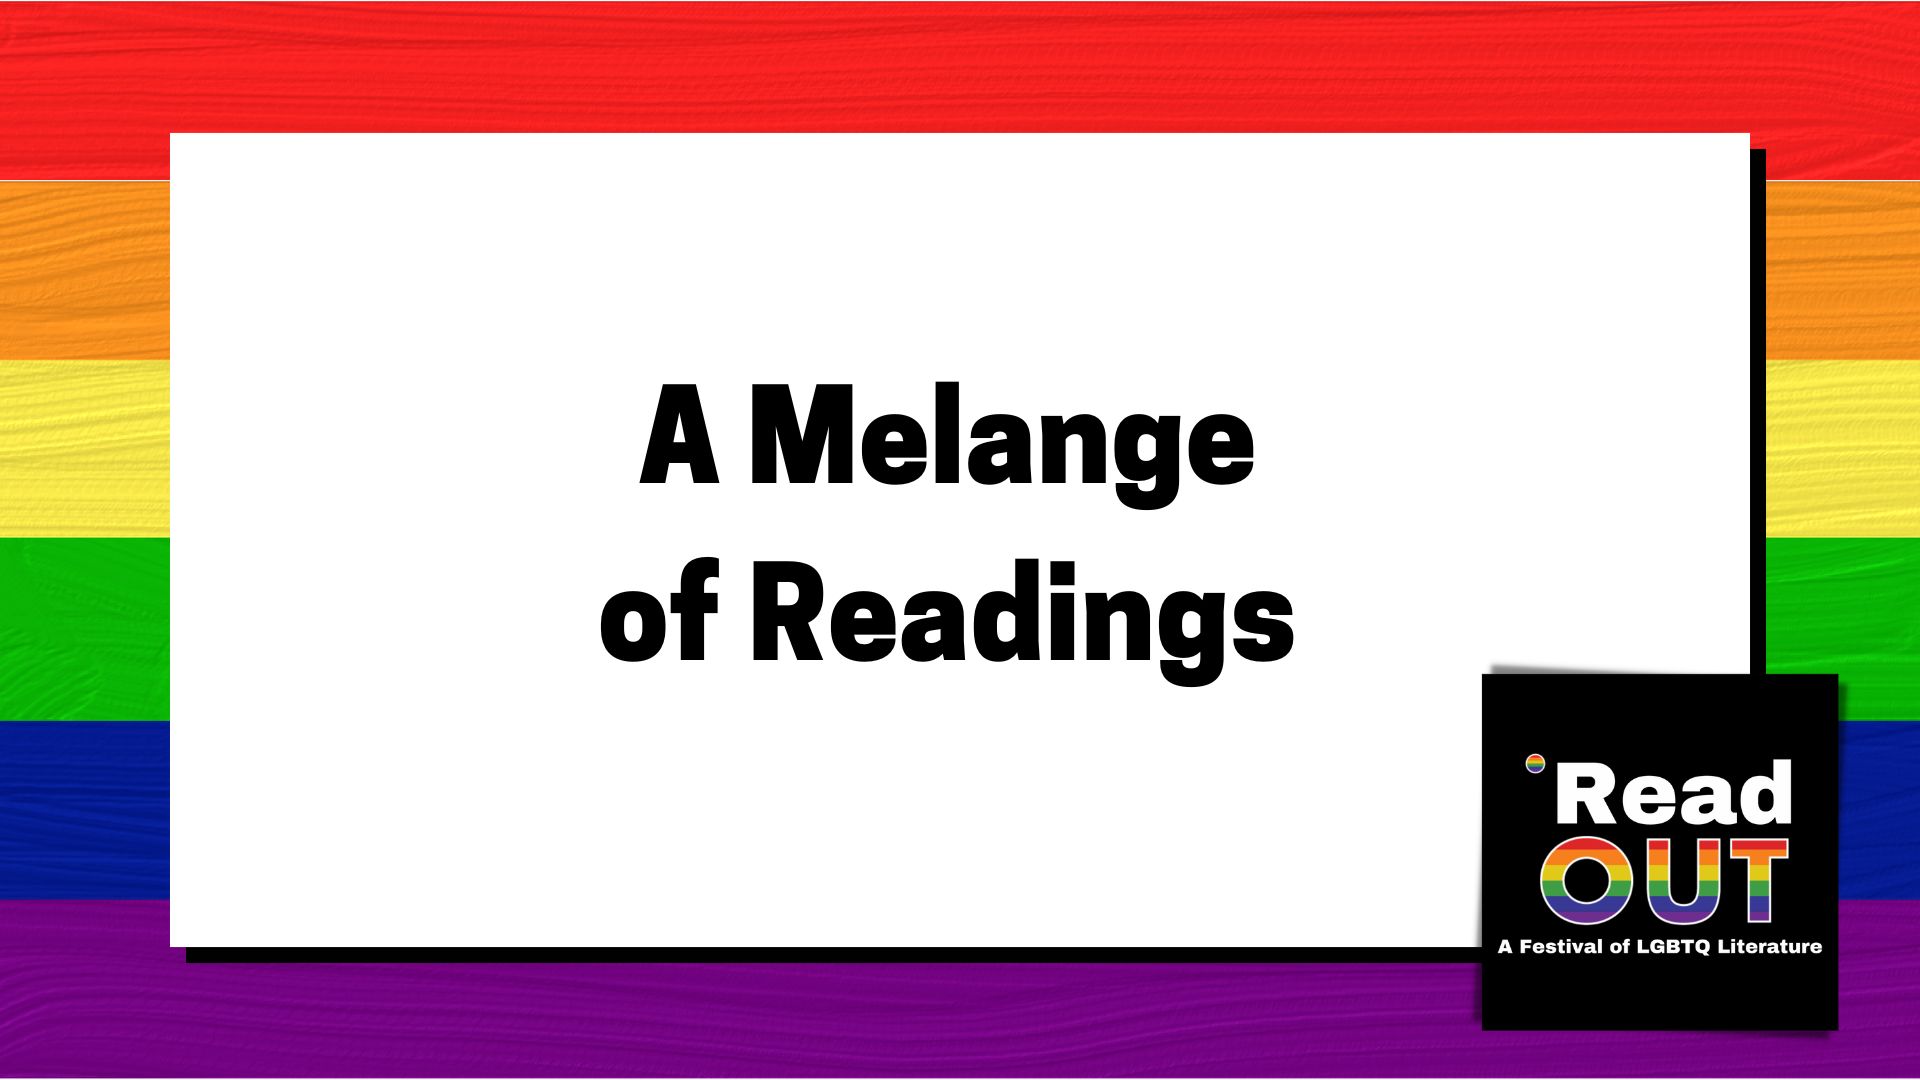 A Mélange of Reading